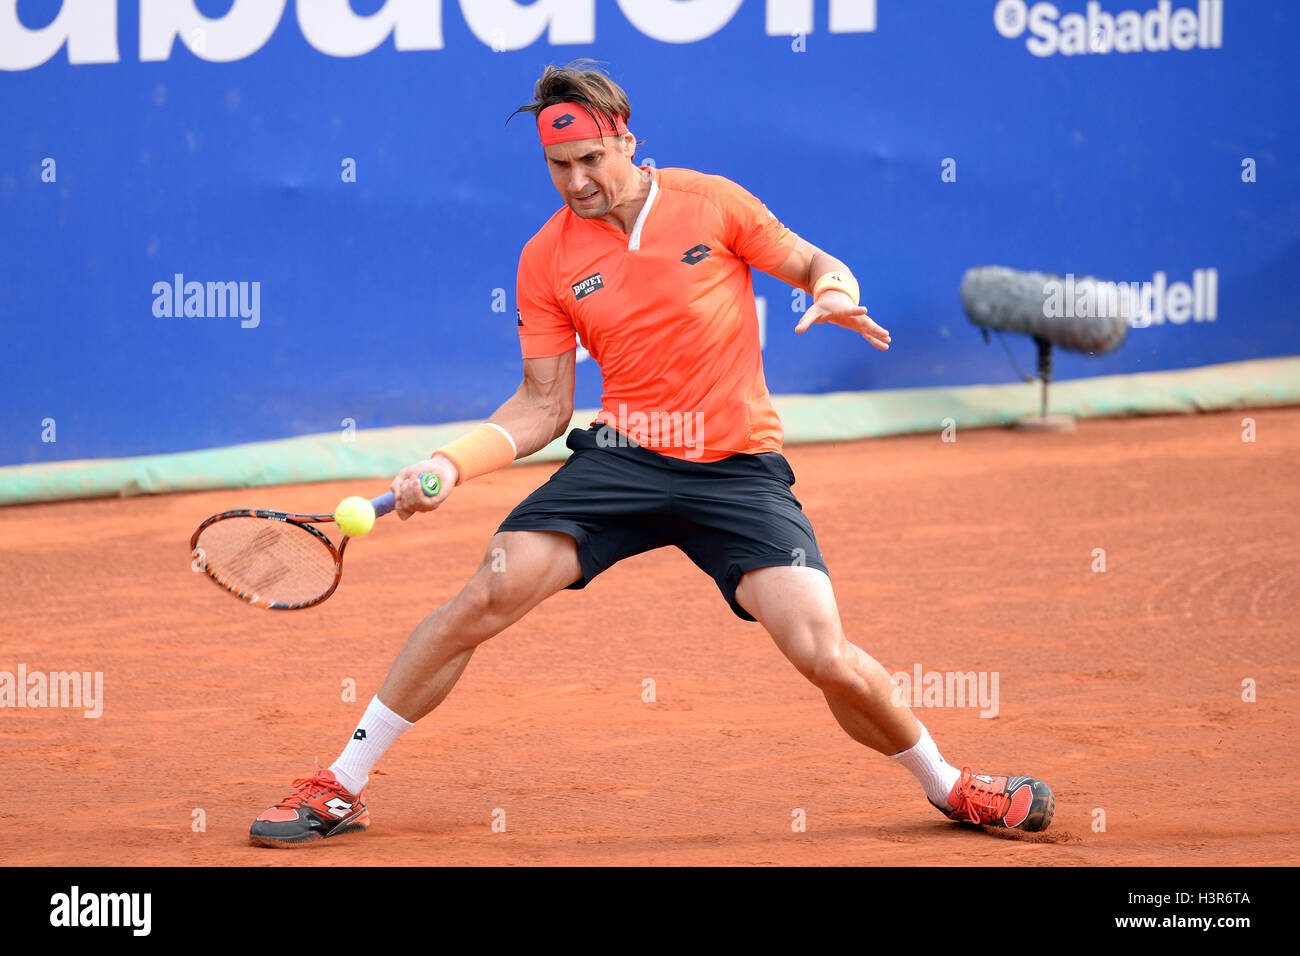 BARCELONA - APR 24: David Ferrer (Spanish tennis player) celebrates a victory at the ATP Barcelona Open Banc Sabadell. Stock Photo